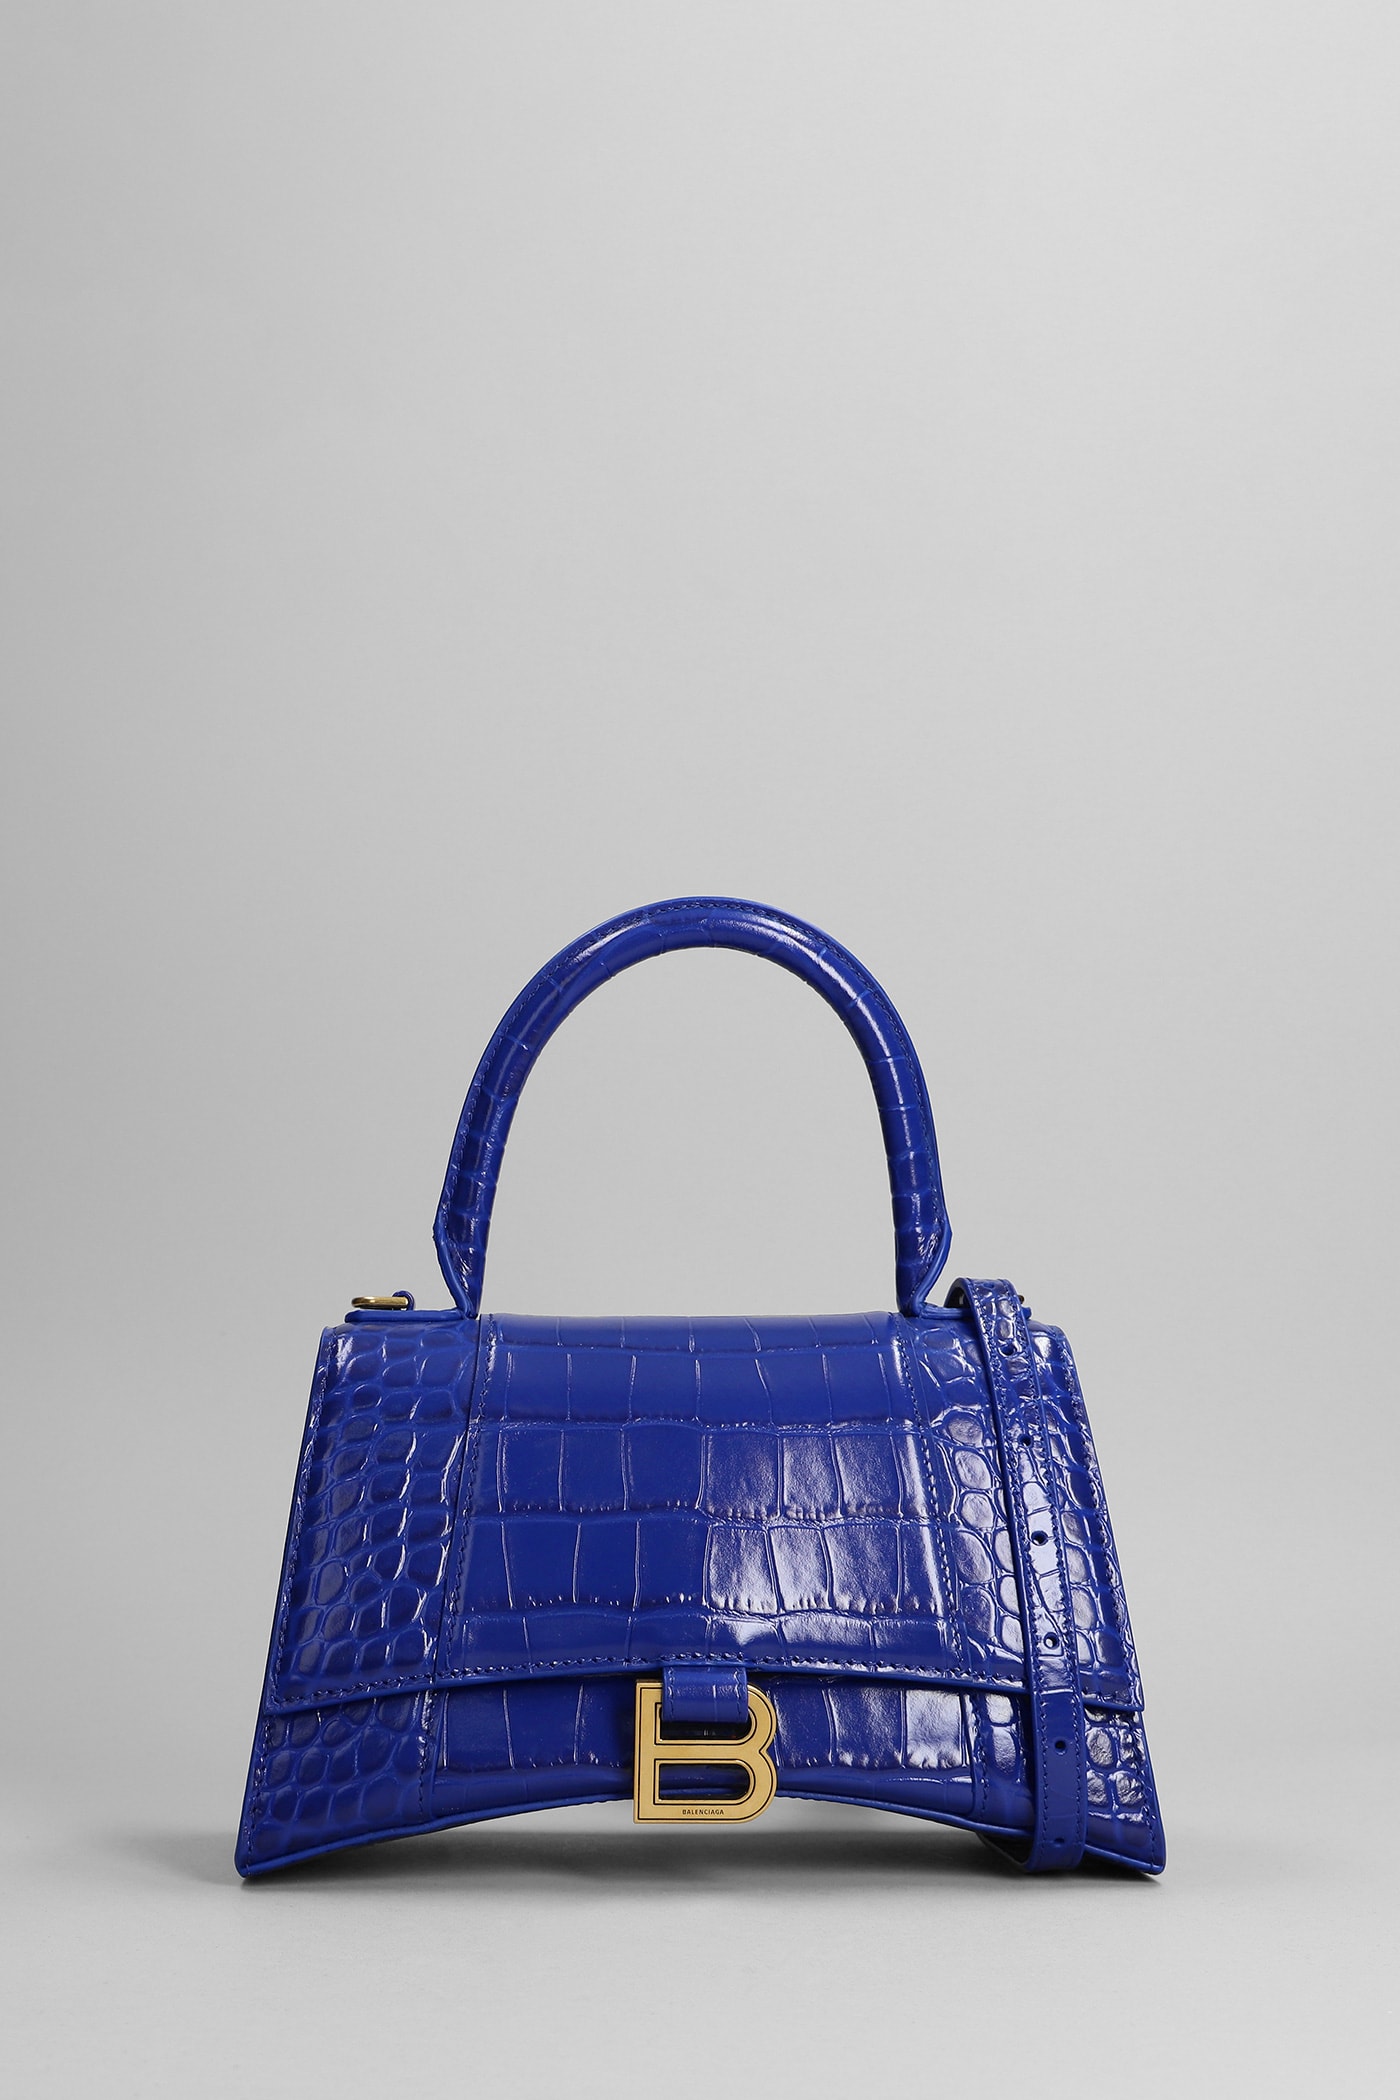 Balenciaga Hourglass Shoulder Bag In Blue Leather